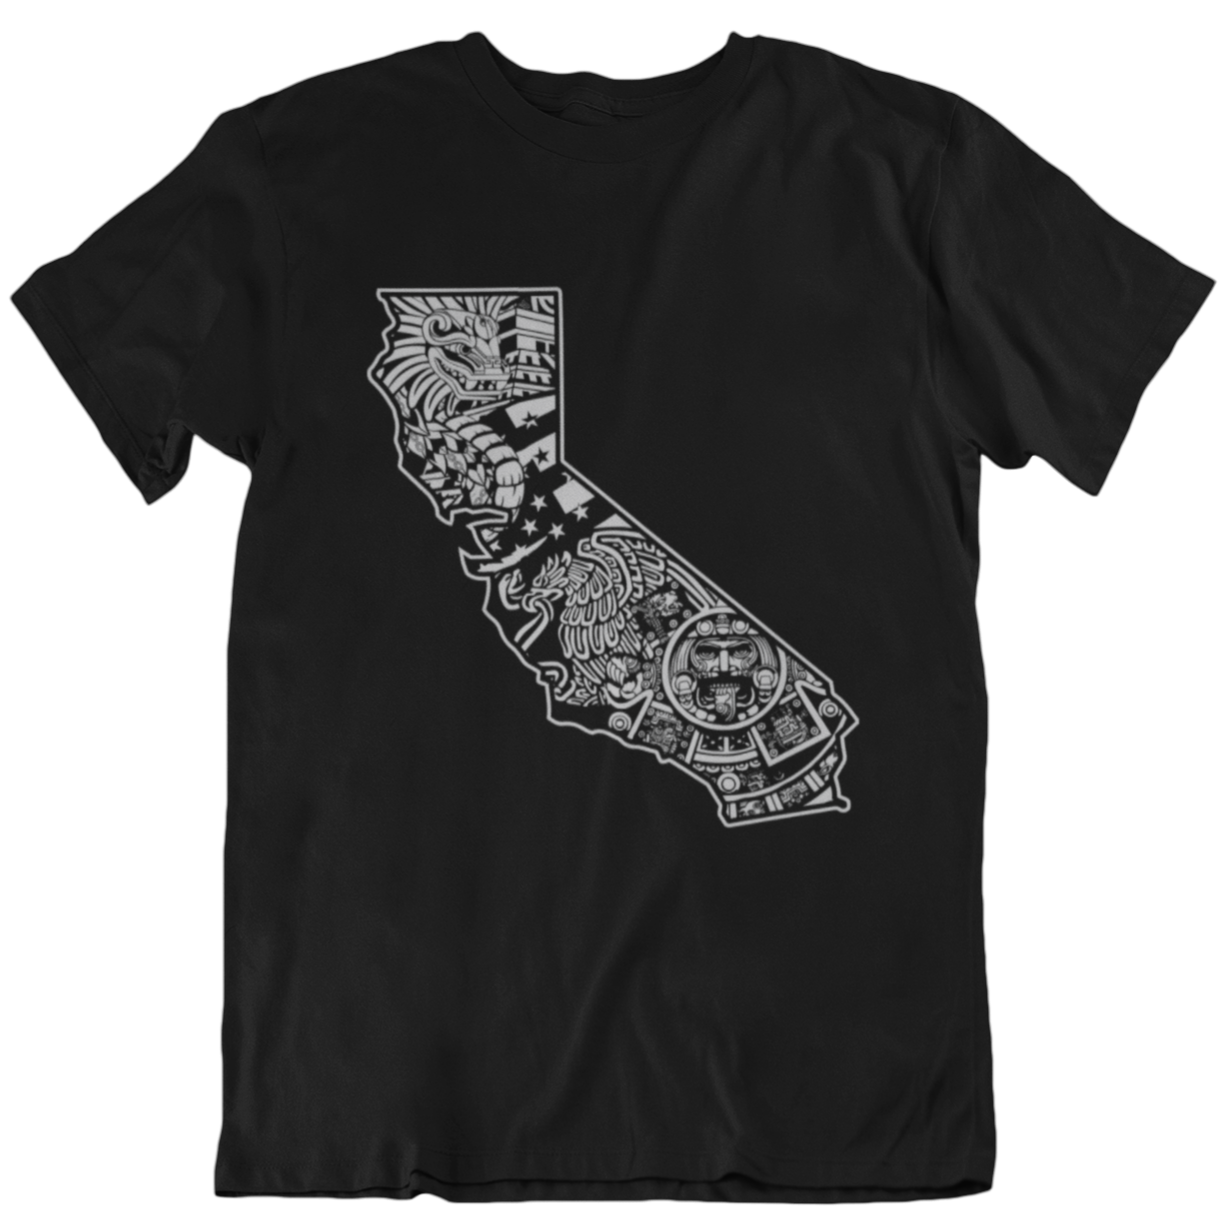  Mens Mexican pride through an eye-catching design of the state of California filled grayscale with Aztec designs